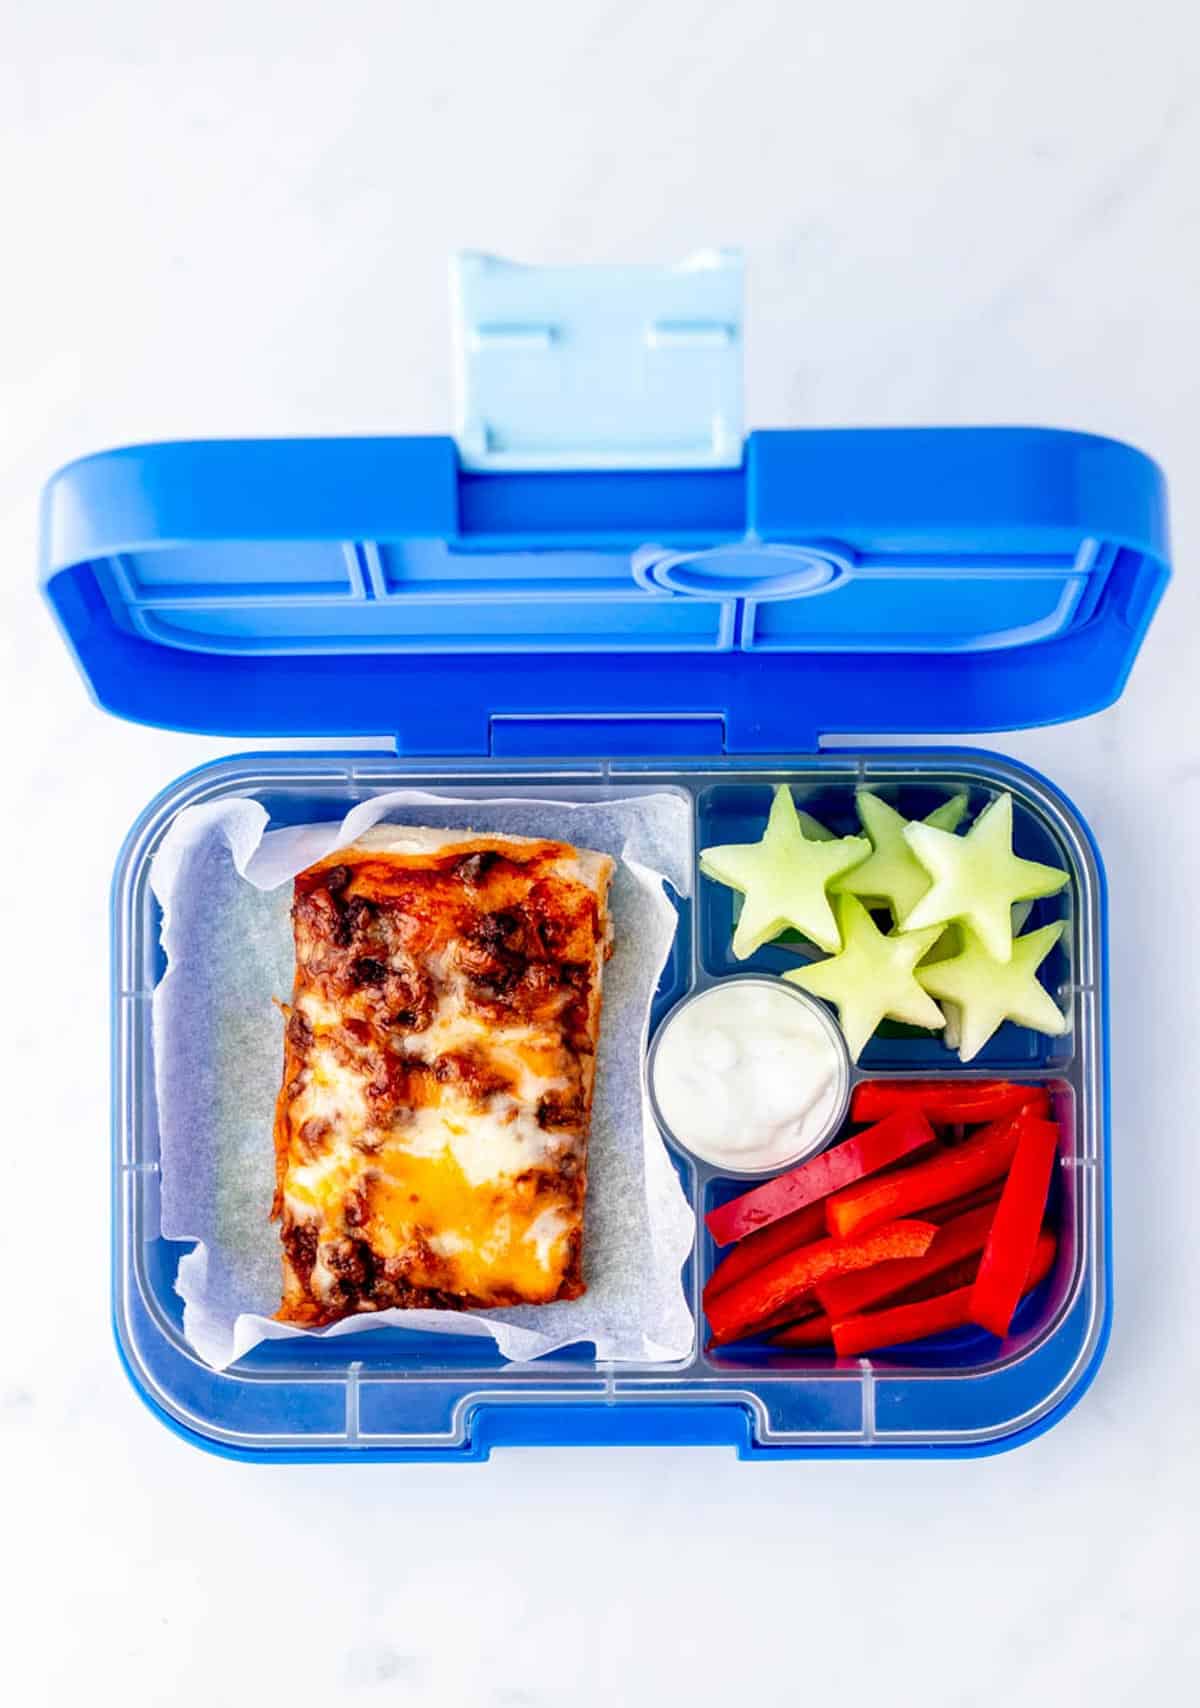 A slice of fiestada pizza in a blue lunch box with honey melon stars and red pepper strips.